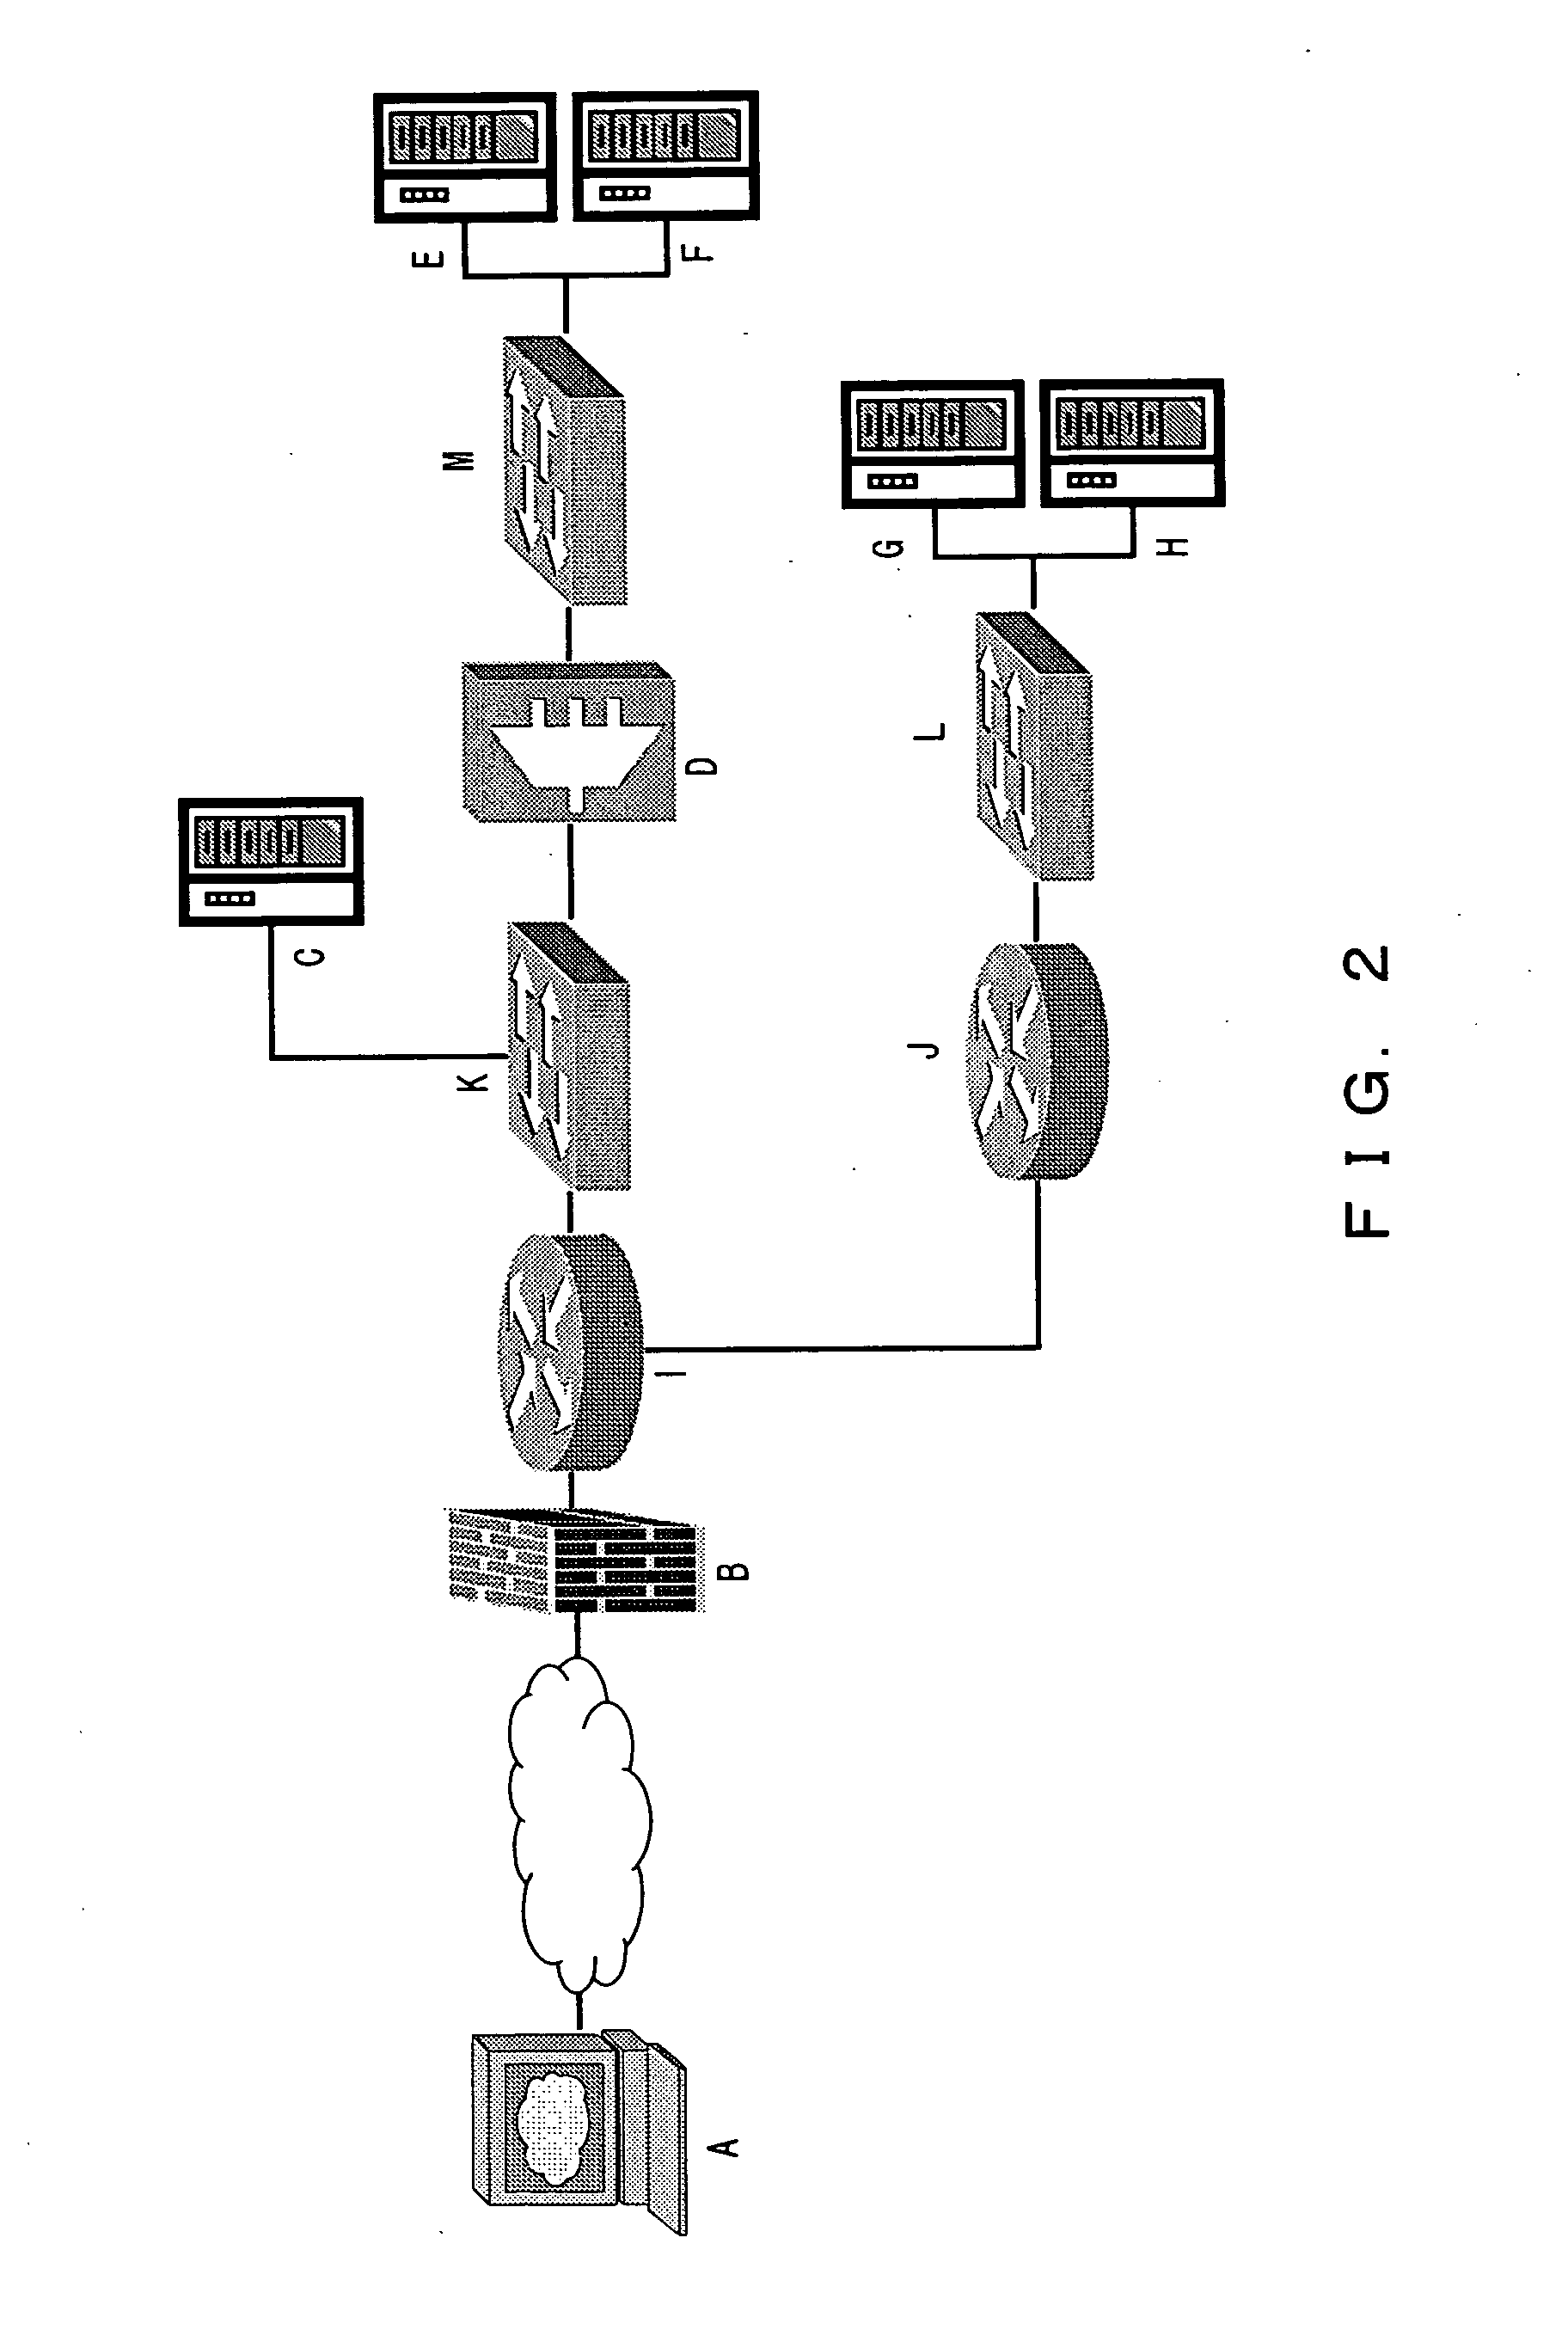 Fault management apparatus and method for identifying cause of fault in communication network